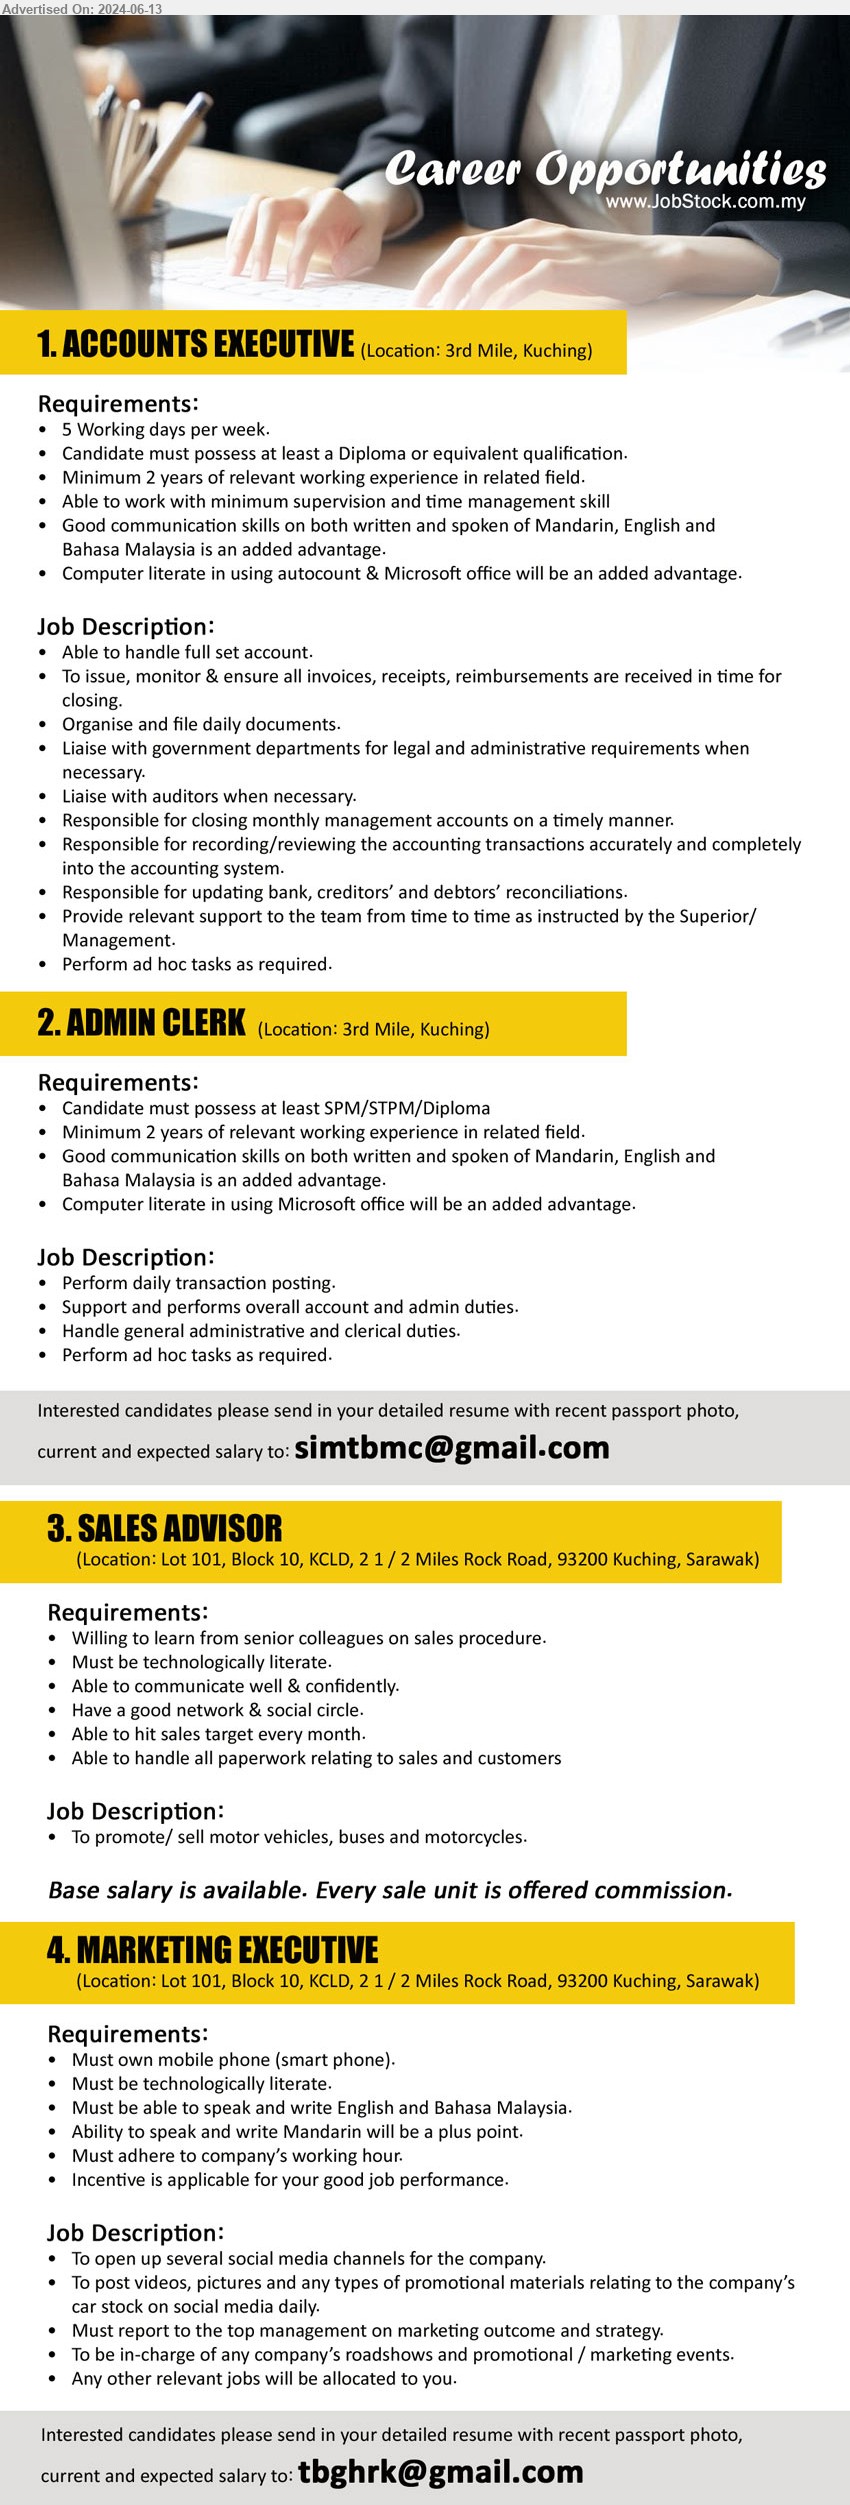 ADVERTISER - 1. ACCOUNTS EXECUTIVE (Kuching), Diploma, Computer literate in using autocount & Microsoft office,...
2. ADMIN CLERK (Kuching),  SPM/STPM/Diploma, Minimum 2 years of relevant working experience,...
3. SALES ADVISOR  (Kuching), Must be technologically literate, Able to communicate well & confidently. ,...
4. MARKETING EXECUTIVE  (Kuching), Must own mobile phone (smart phone), Must be technologically literate.,...
Email resume to ...